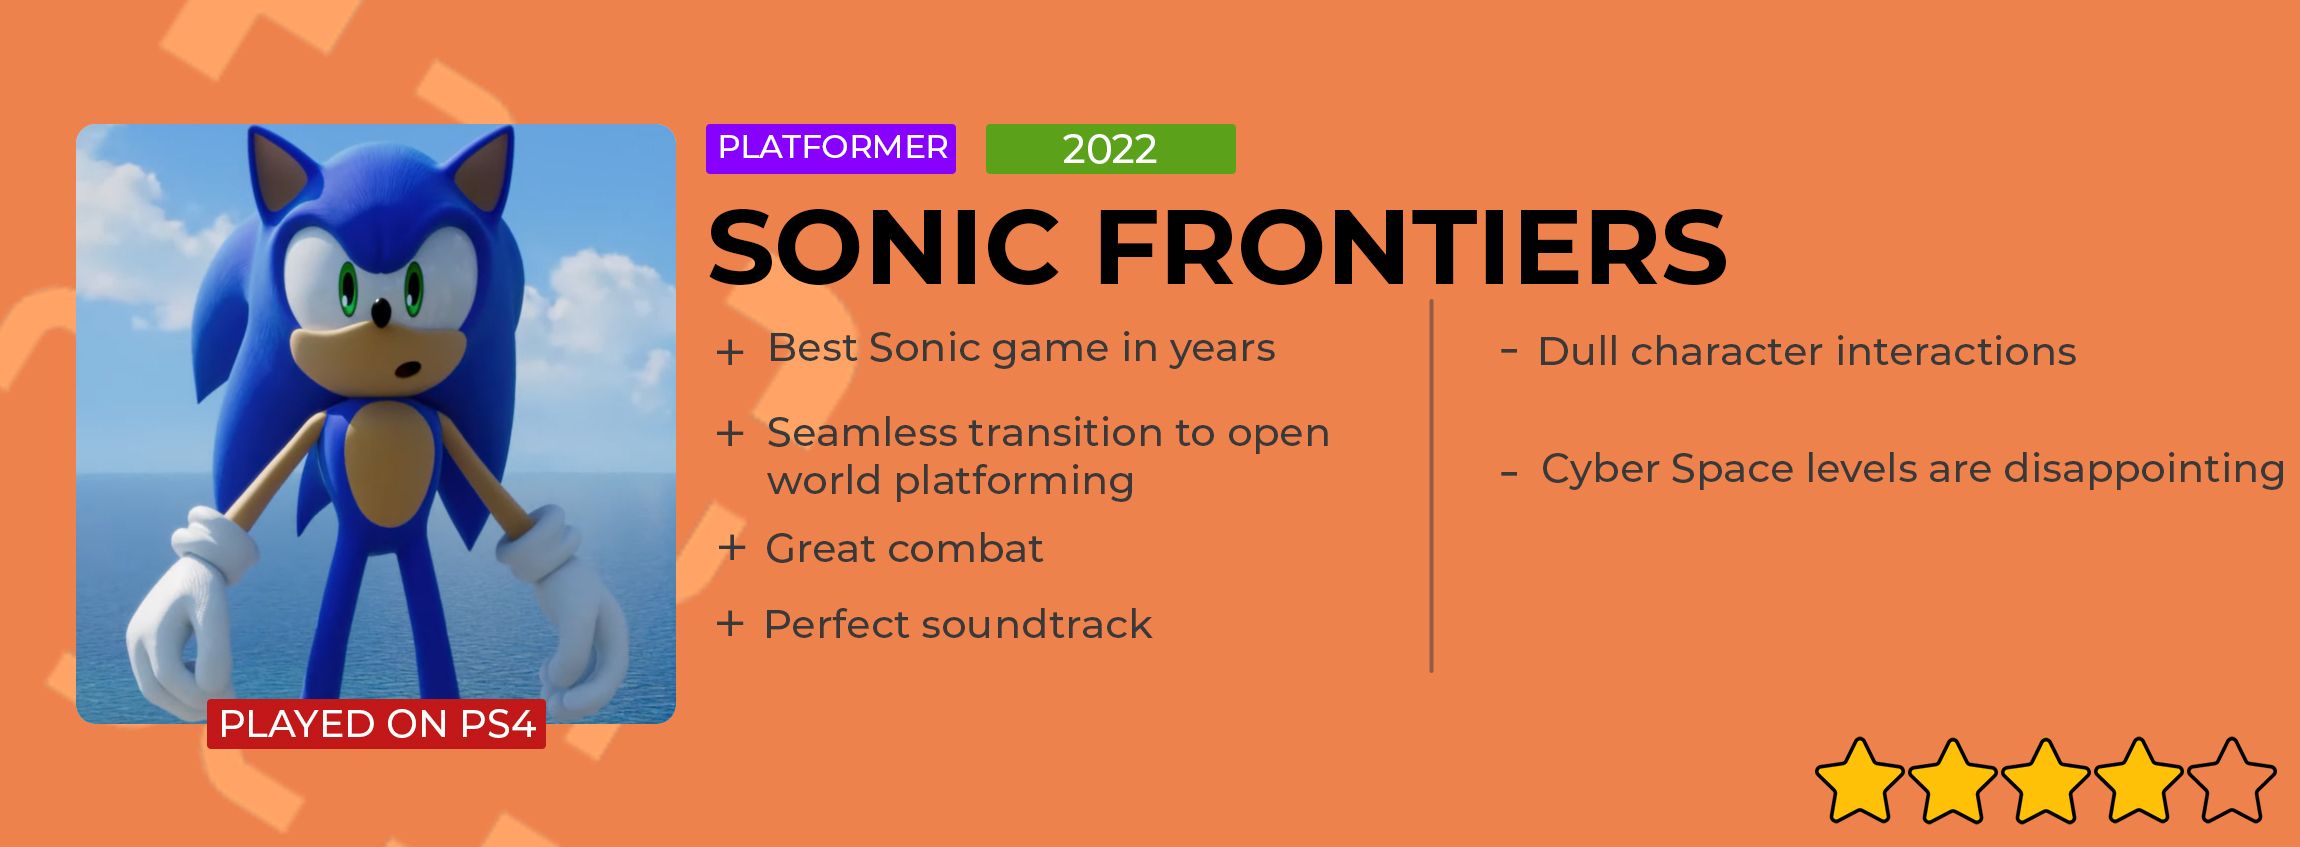 Sonic Frontiers review card